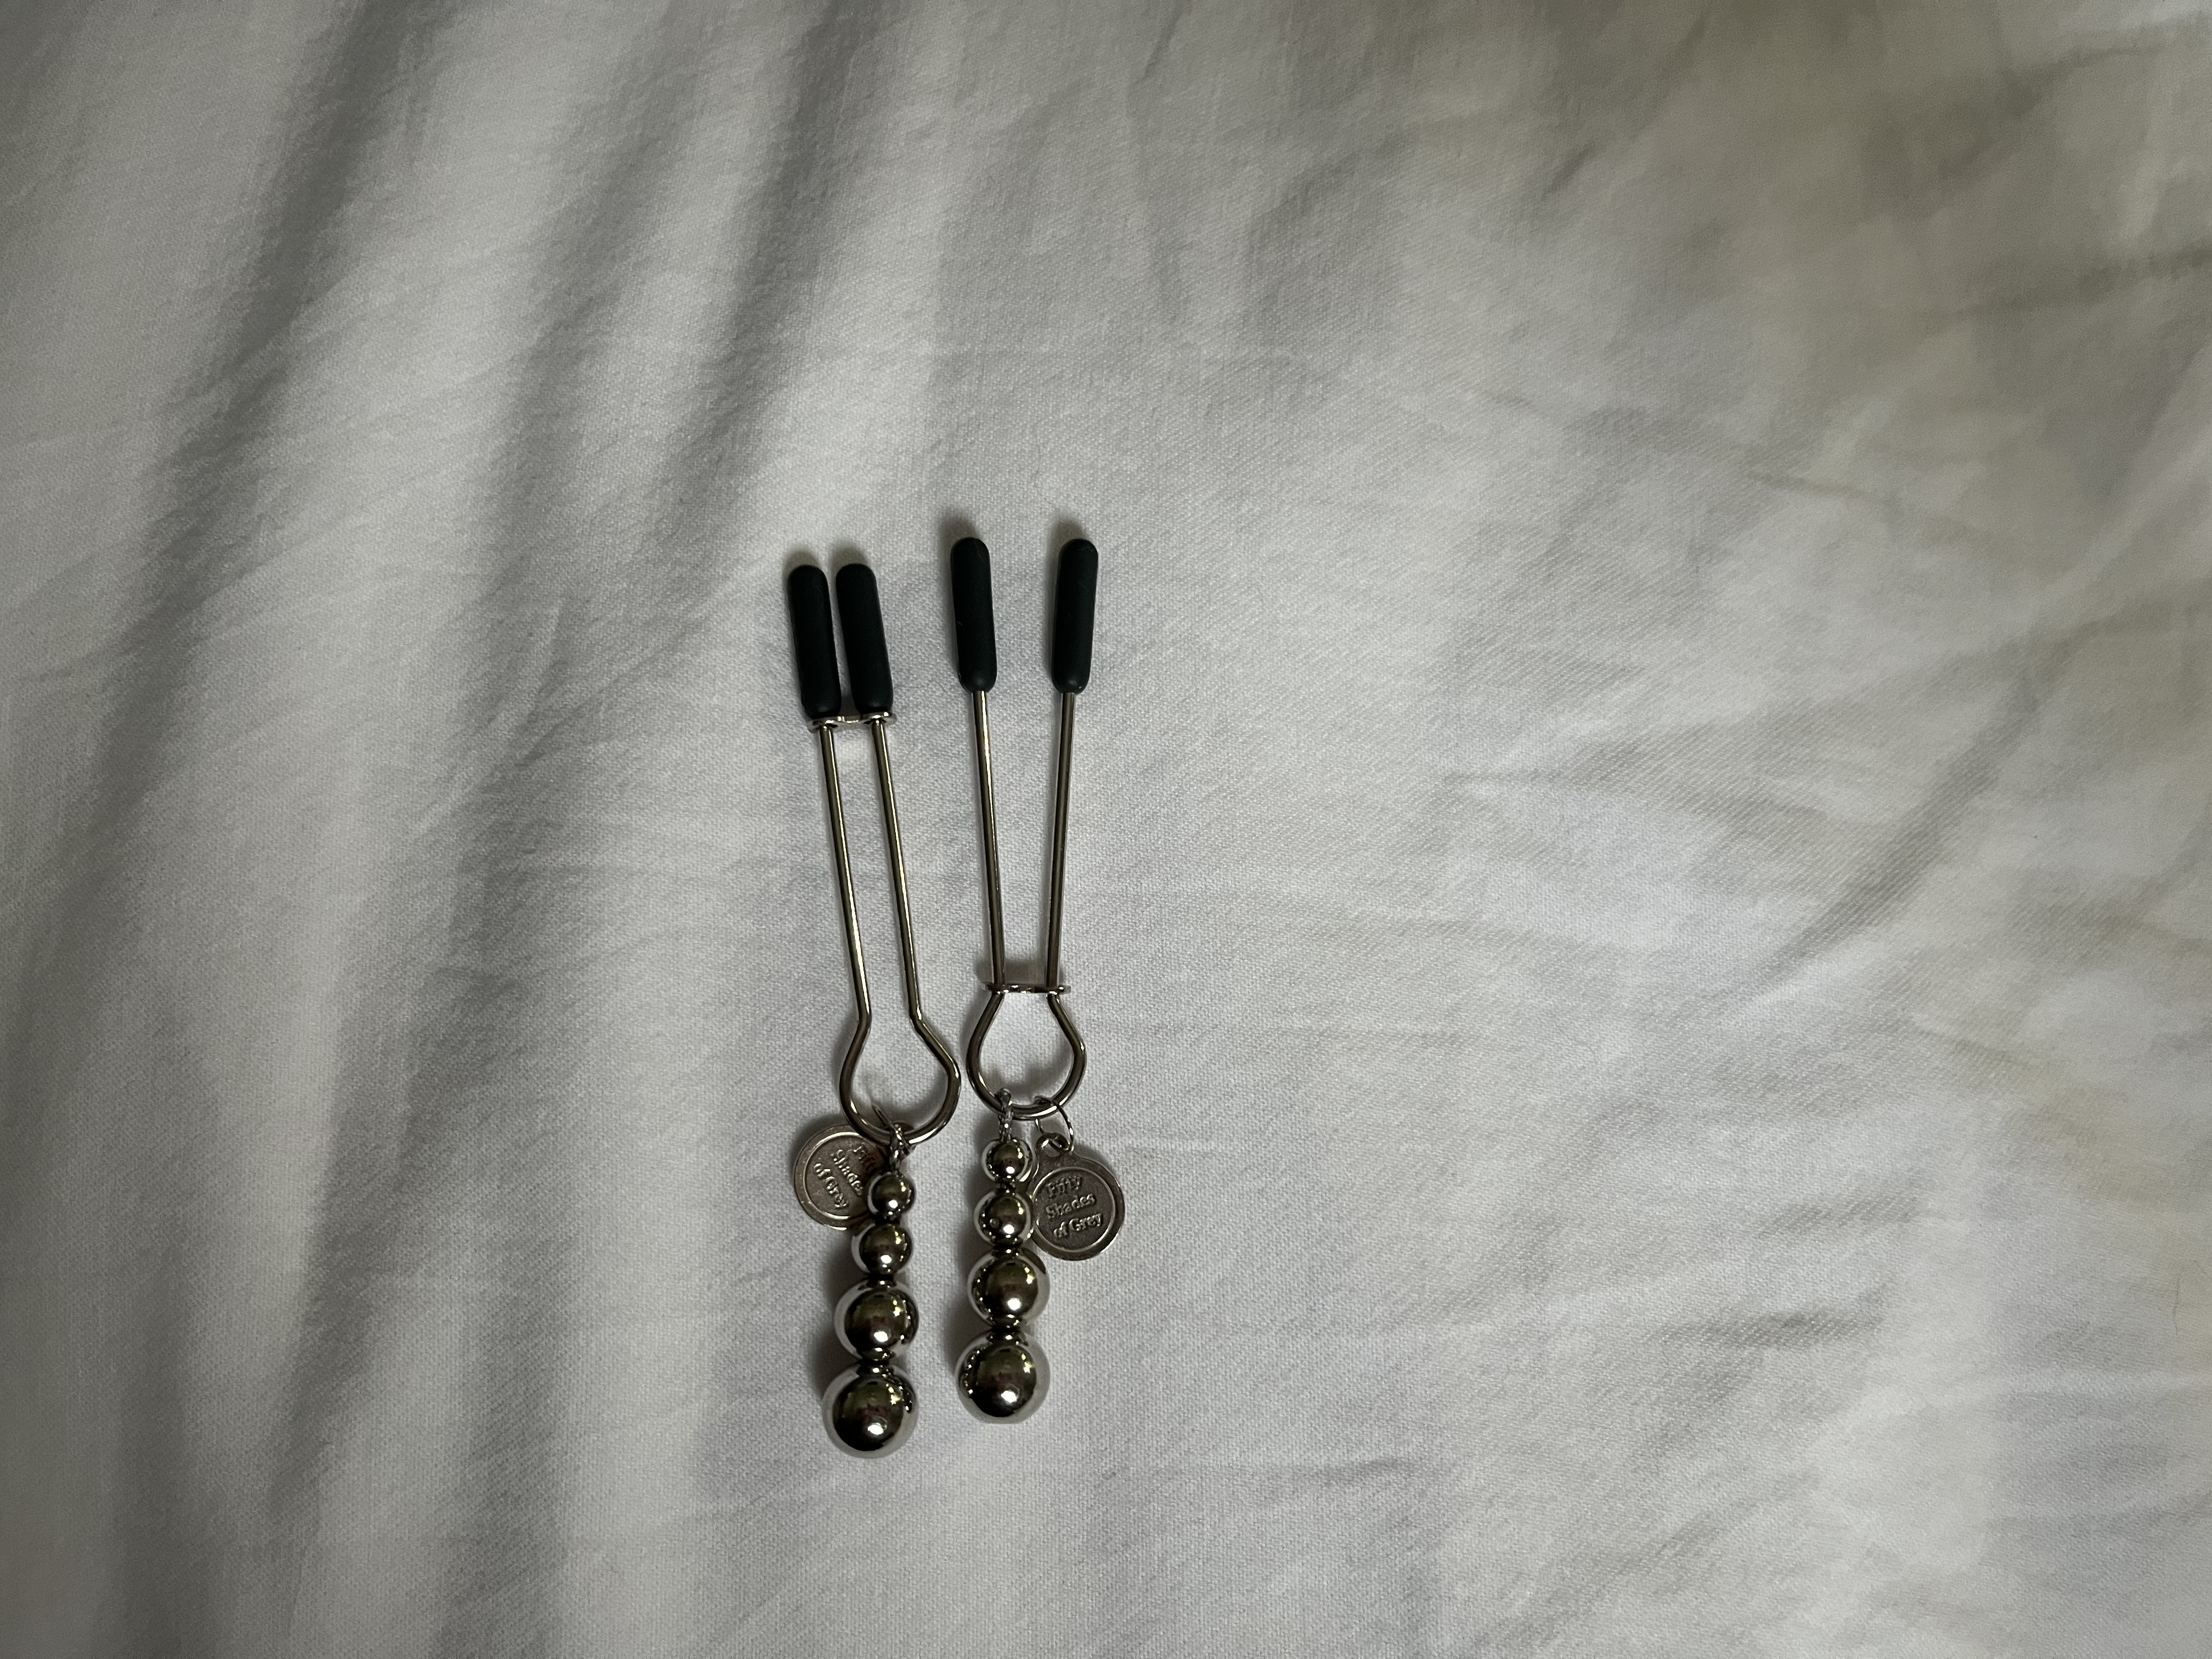 Fifty Shades of Grey The Pinch Adjustable Nipple Clamps. Slide 9